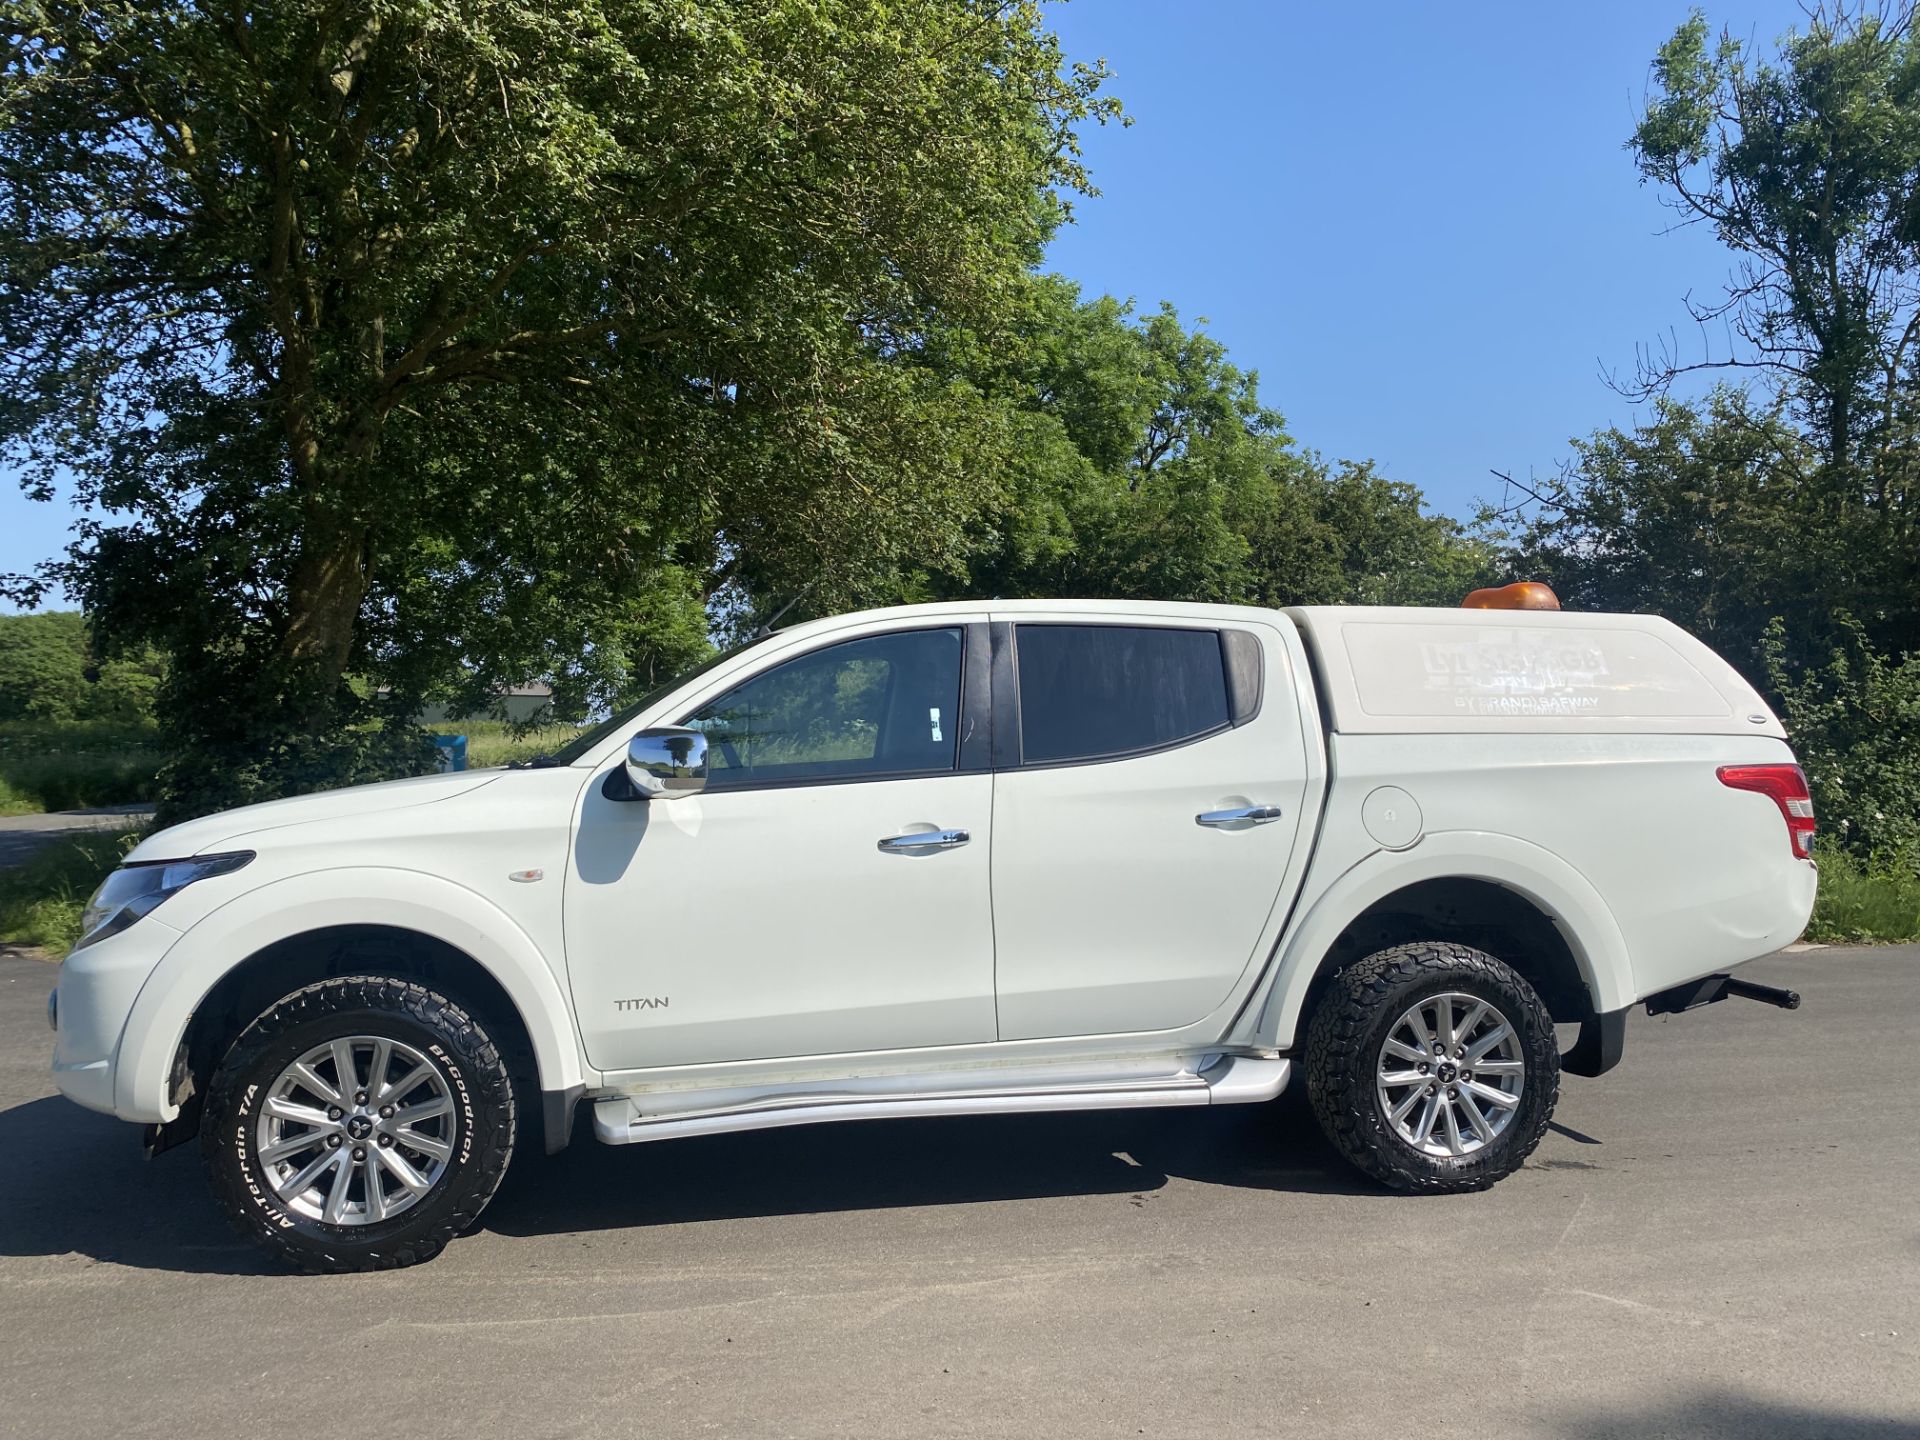 (On Sale) MITSUBISHI L200 "TITAN" D/CAB PICK UP (17 REG) NEW SHAPE - 1 OWNER - REAR CANOPY - AIR CON - Image 5 of 28